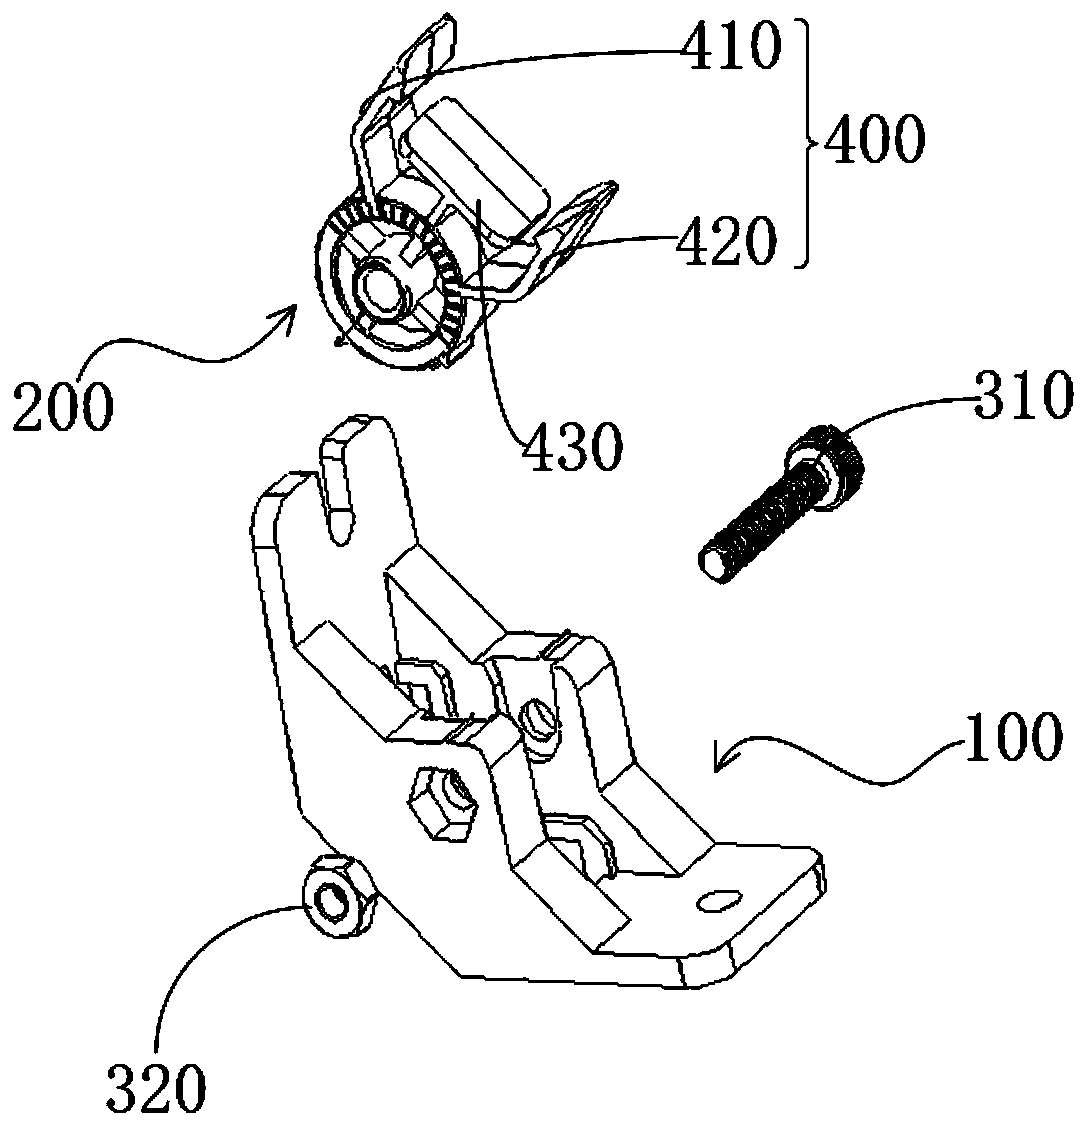 Adjusting support and lighting device